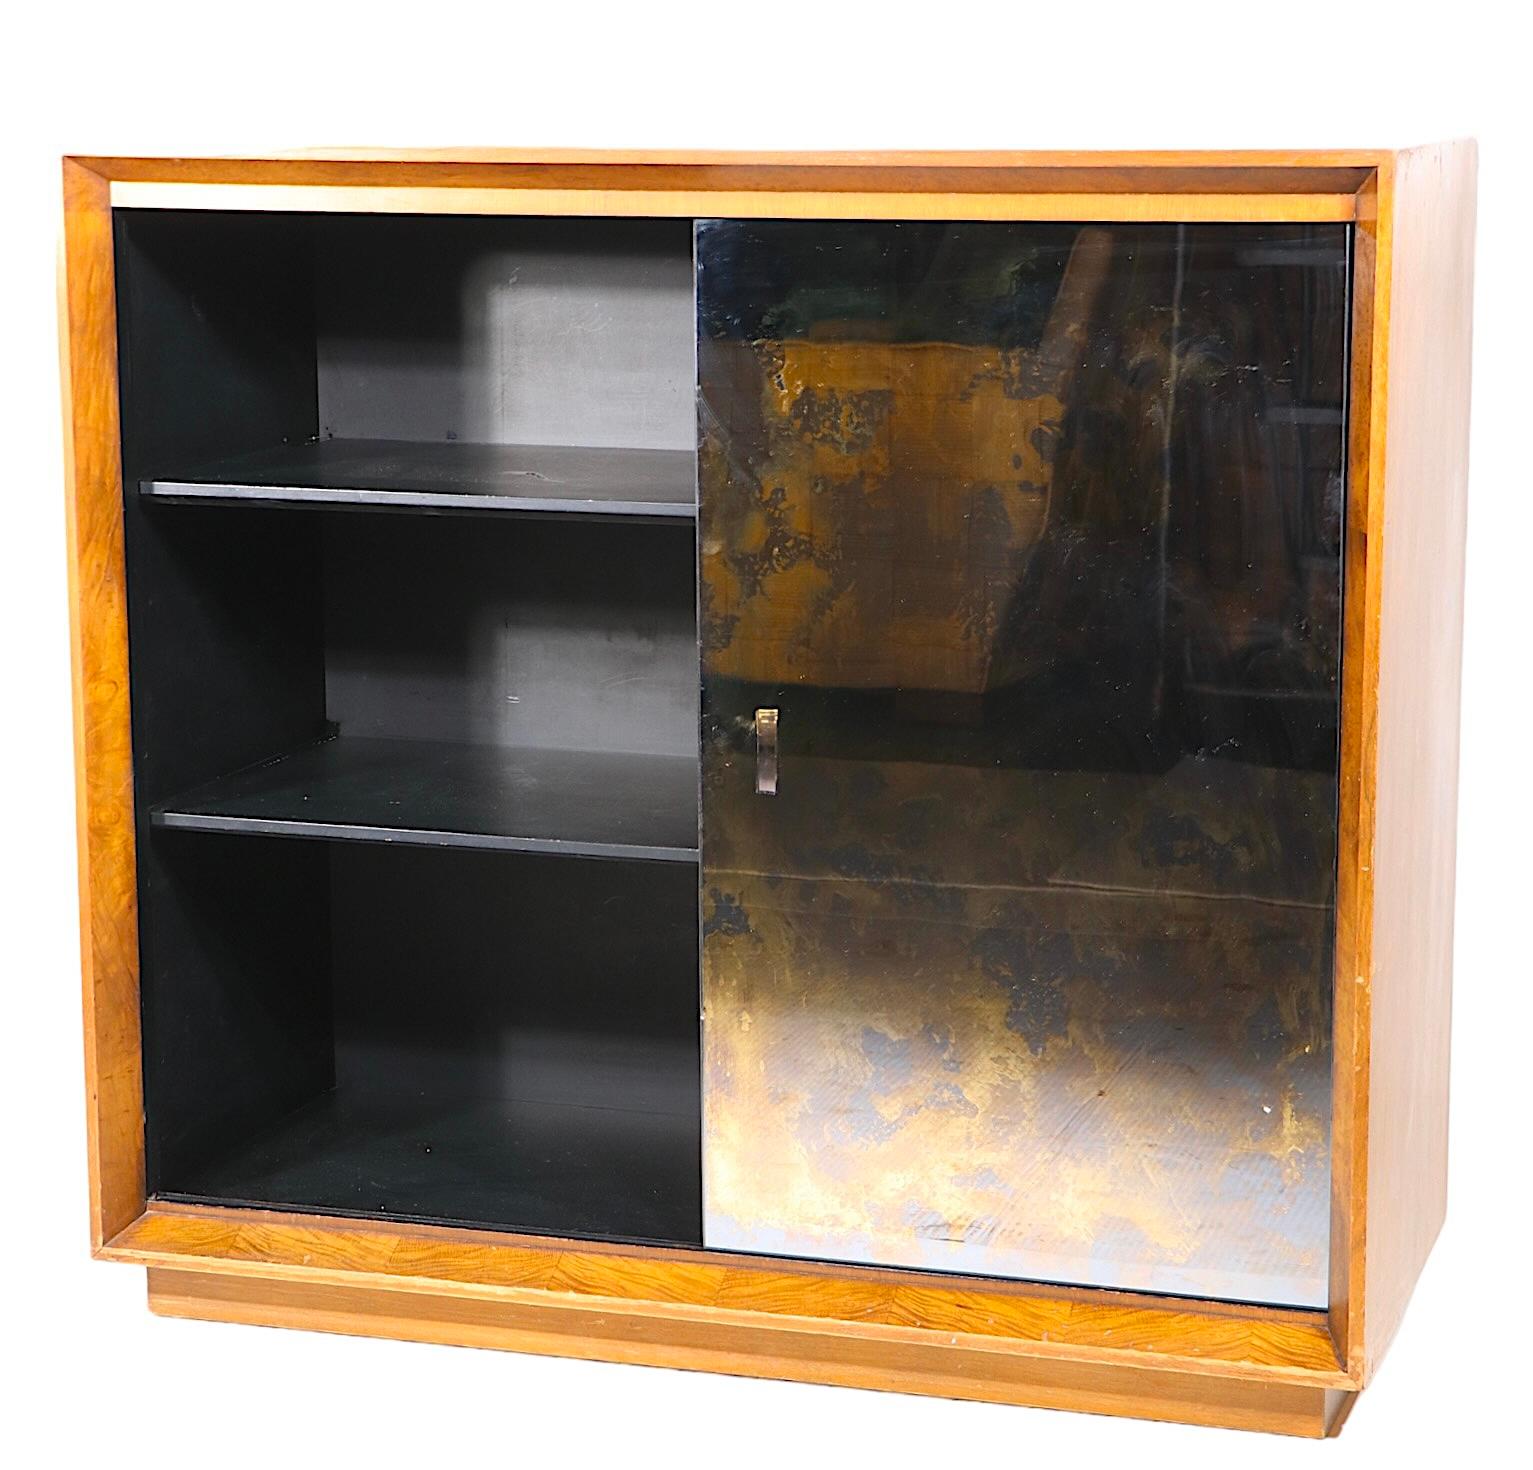 Voguish, chic and sophisticated storage cabinet designed by Gilbert Rohde for Herman Miller as part of the sought after Palladio series, c. 1940’s.
The piece features a walnut case, with burl veneer picture frame molding that surrounds the gold and